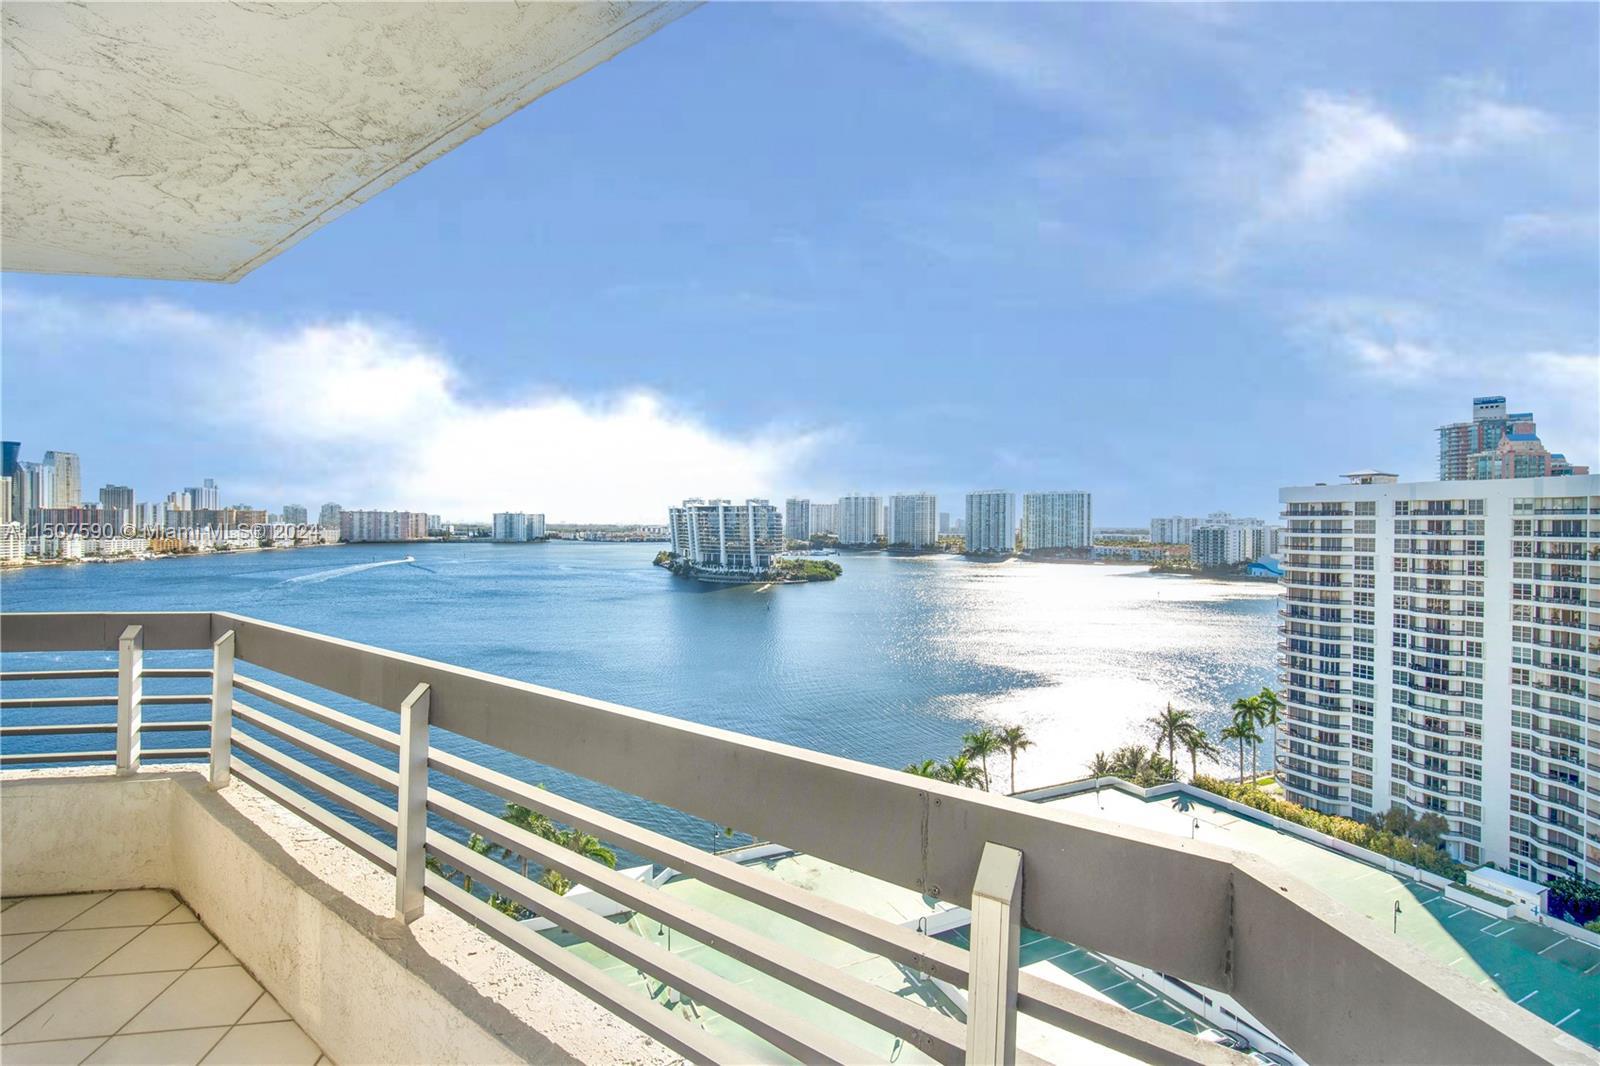 Stunning panoramic views of the bay and skyline from the huge wraparound balcony of this spectacular